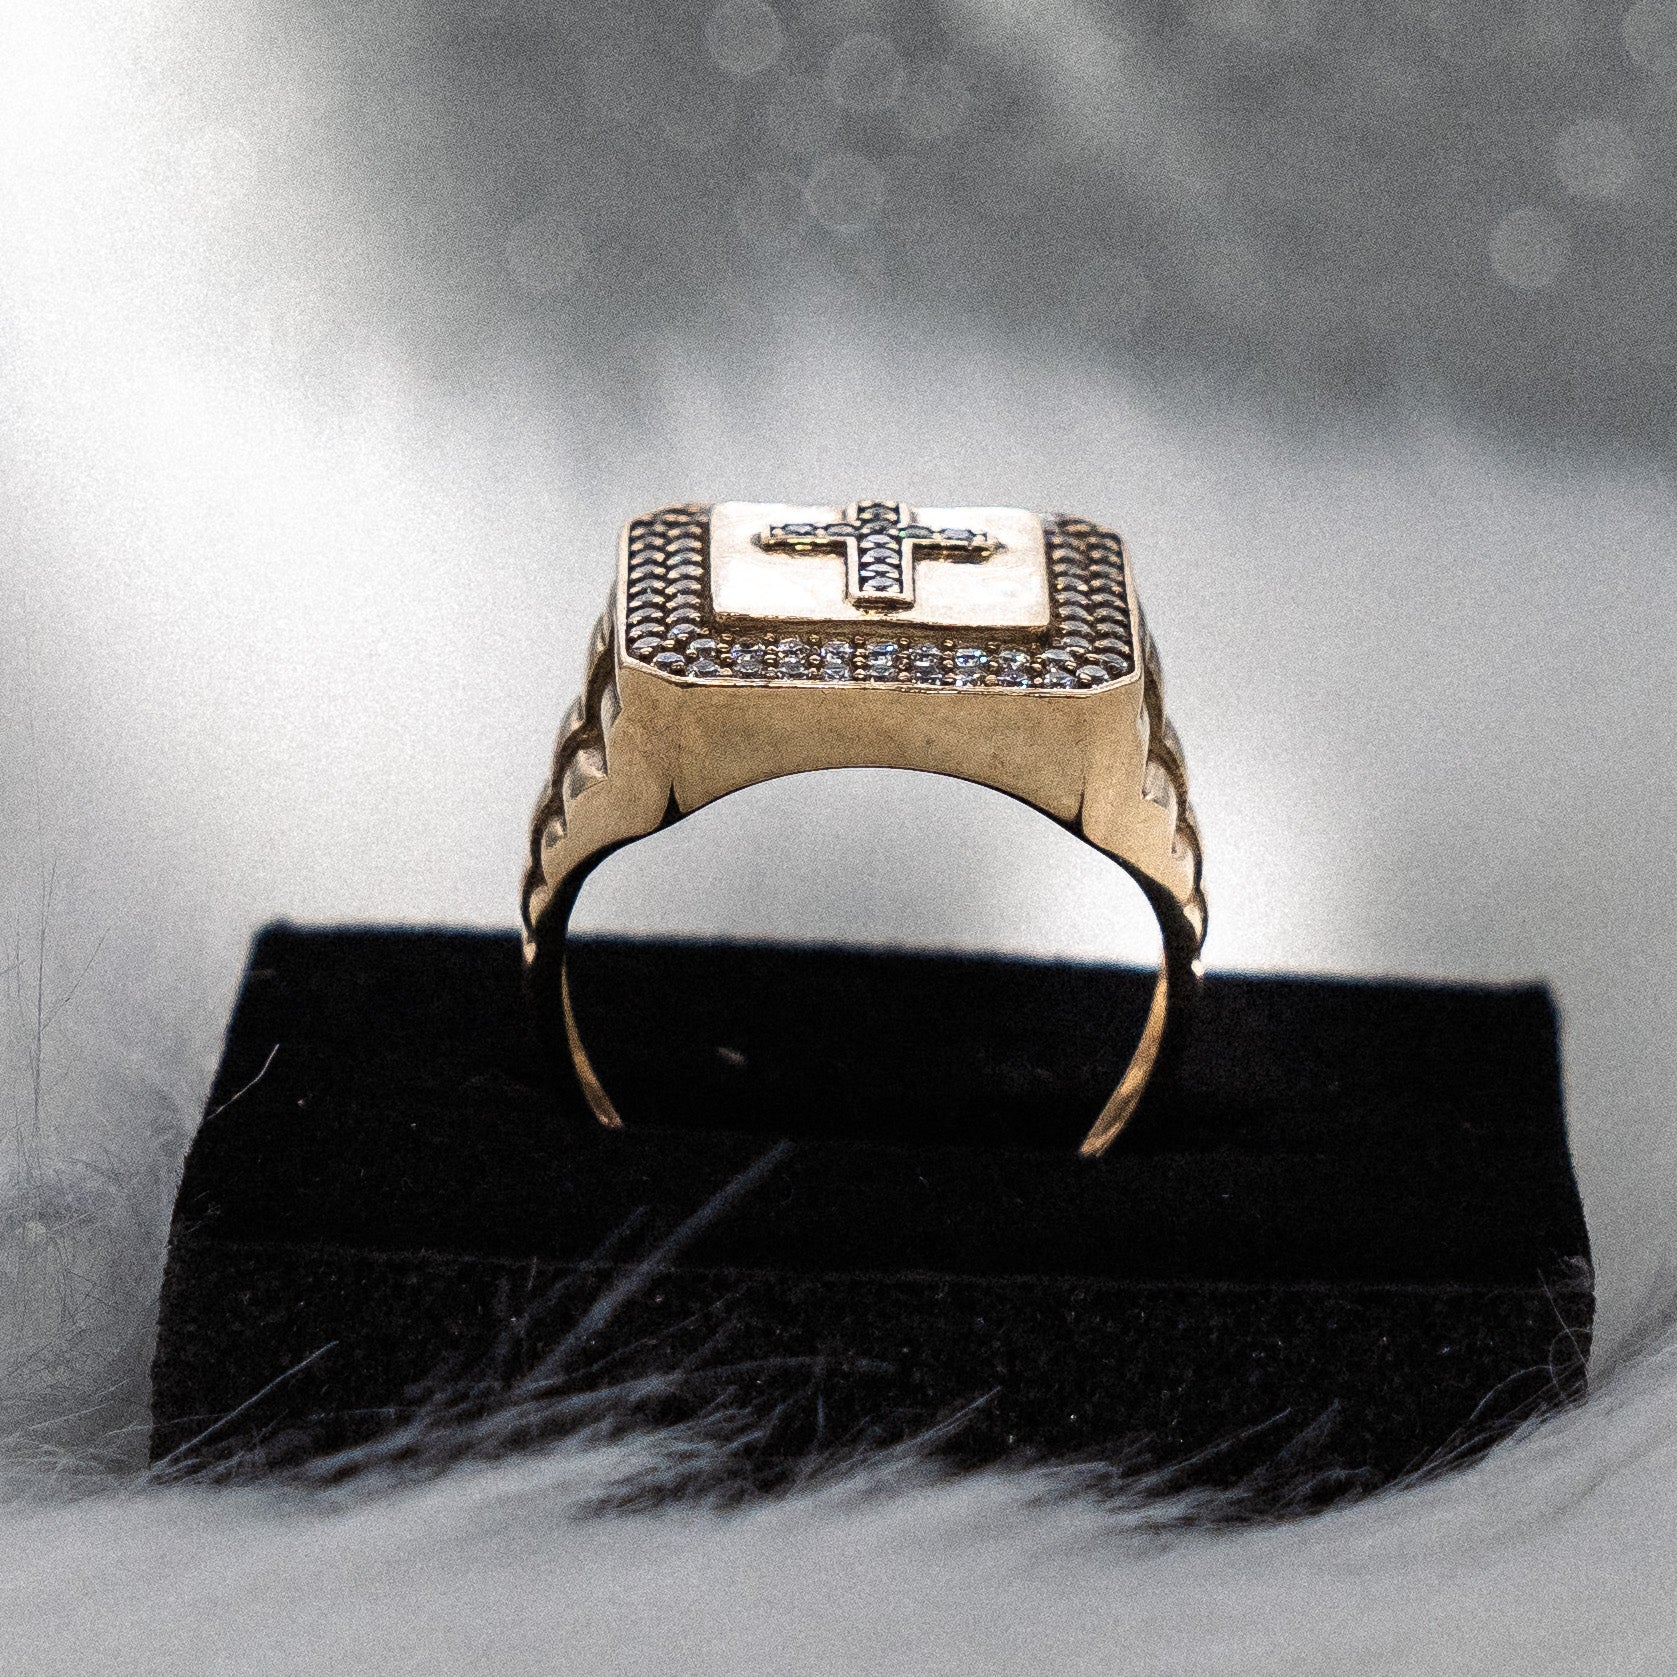 Square Cross Ring 10K Yellow Gold With Zirconia / 4.5gr / Size 9.5